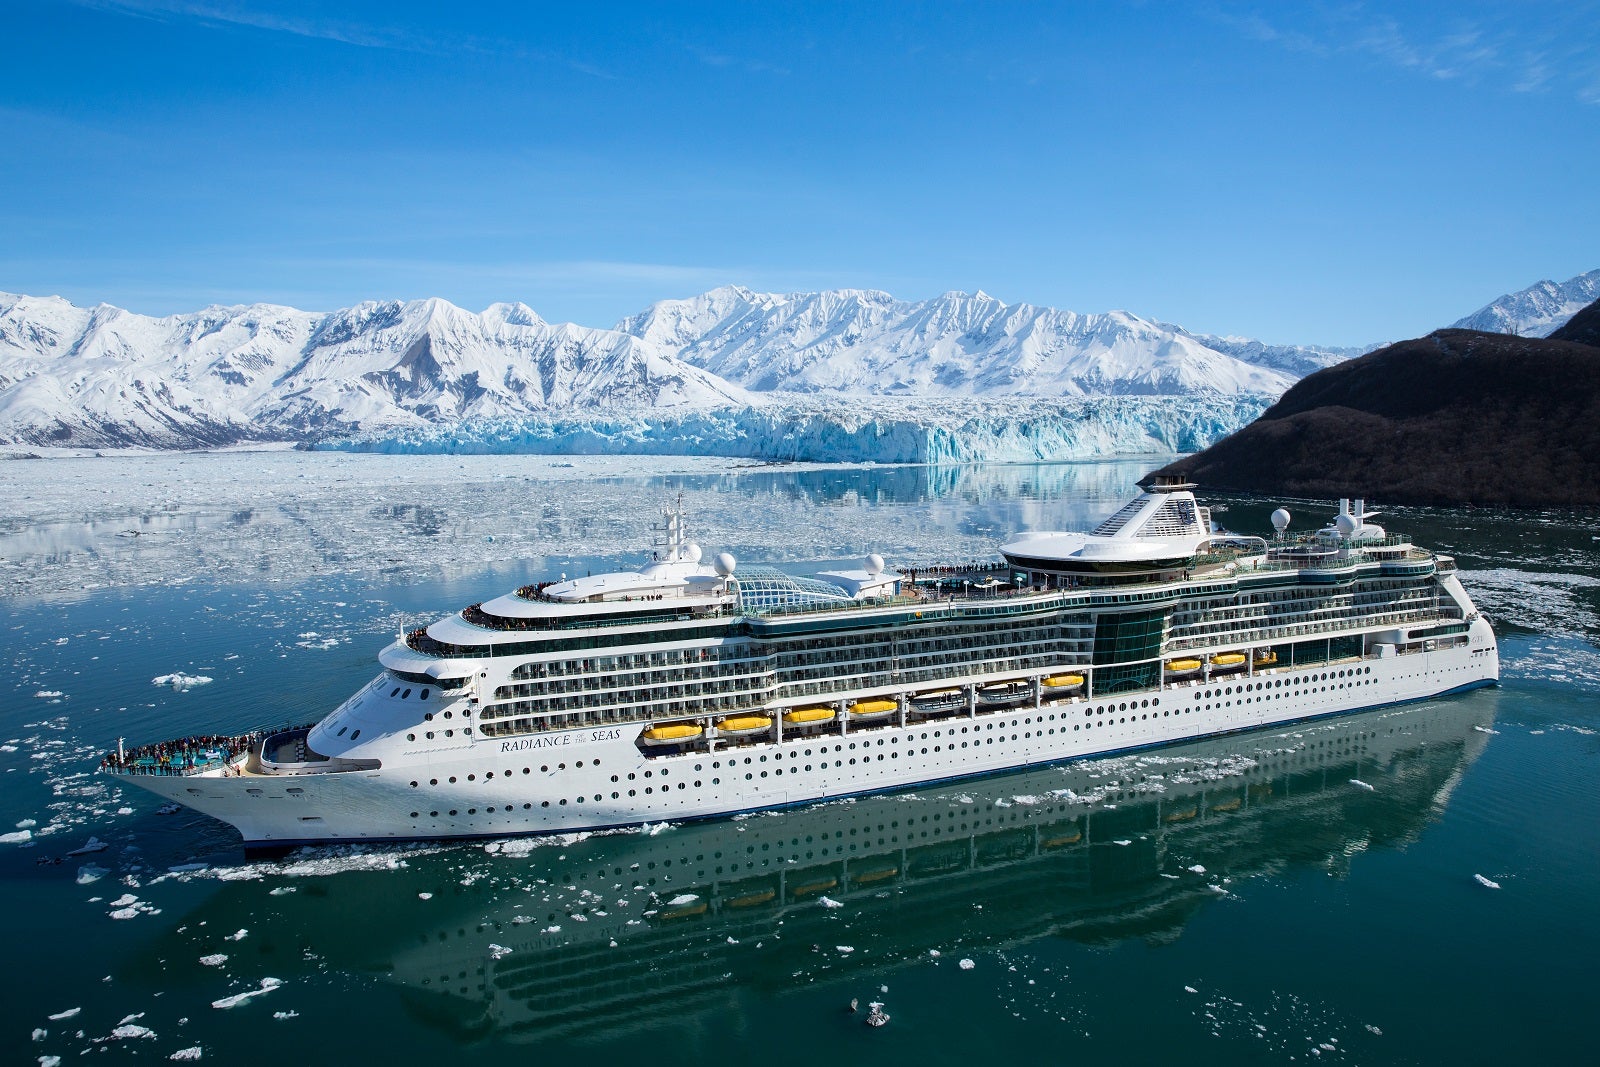 royal caribbean cruise ships ranked by size from biggest to smallest — the complete list